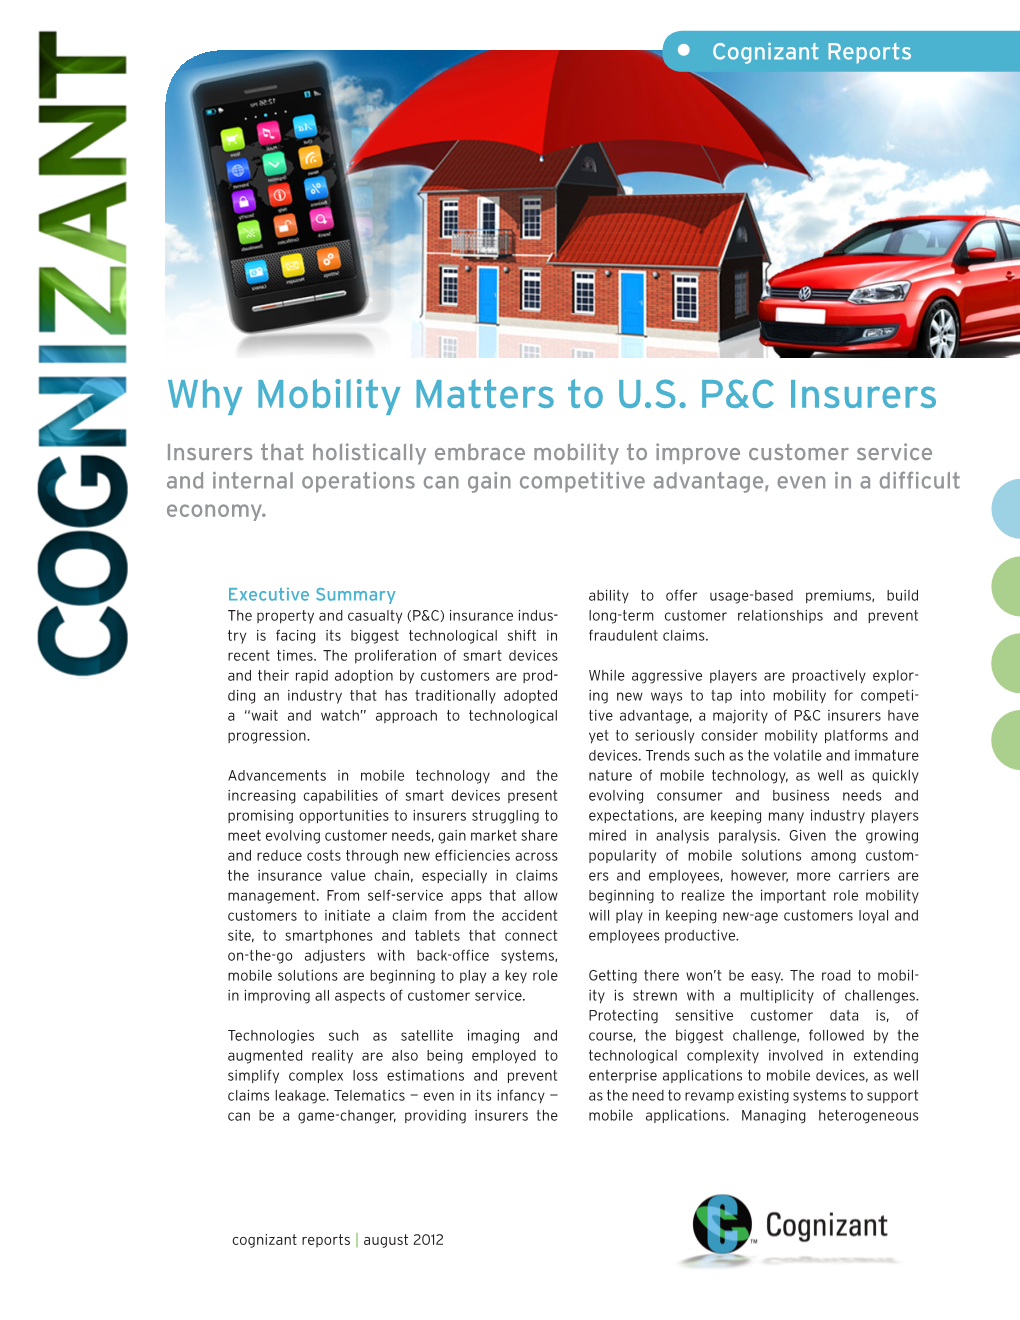 Why Mobility Matters to U.S. P&C Insurers